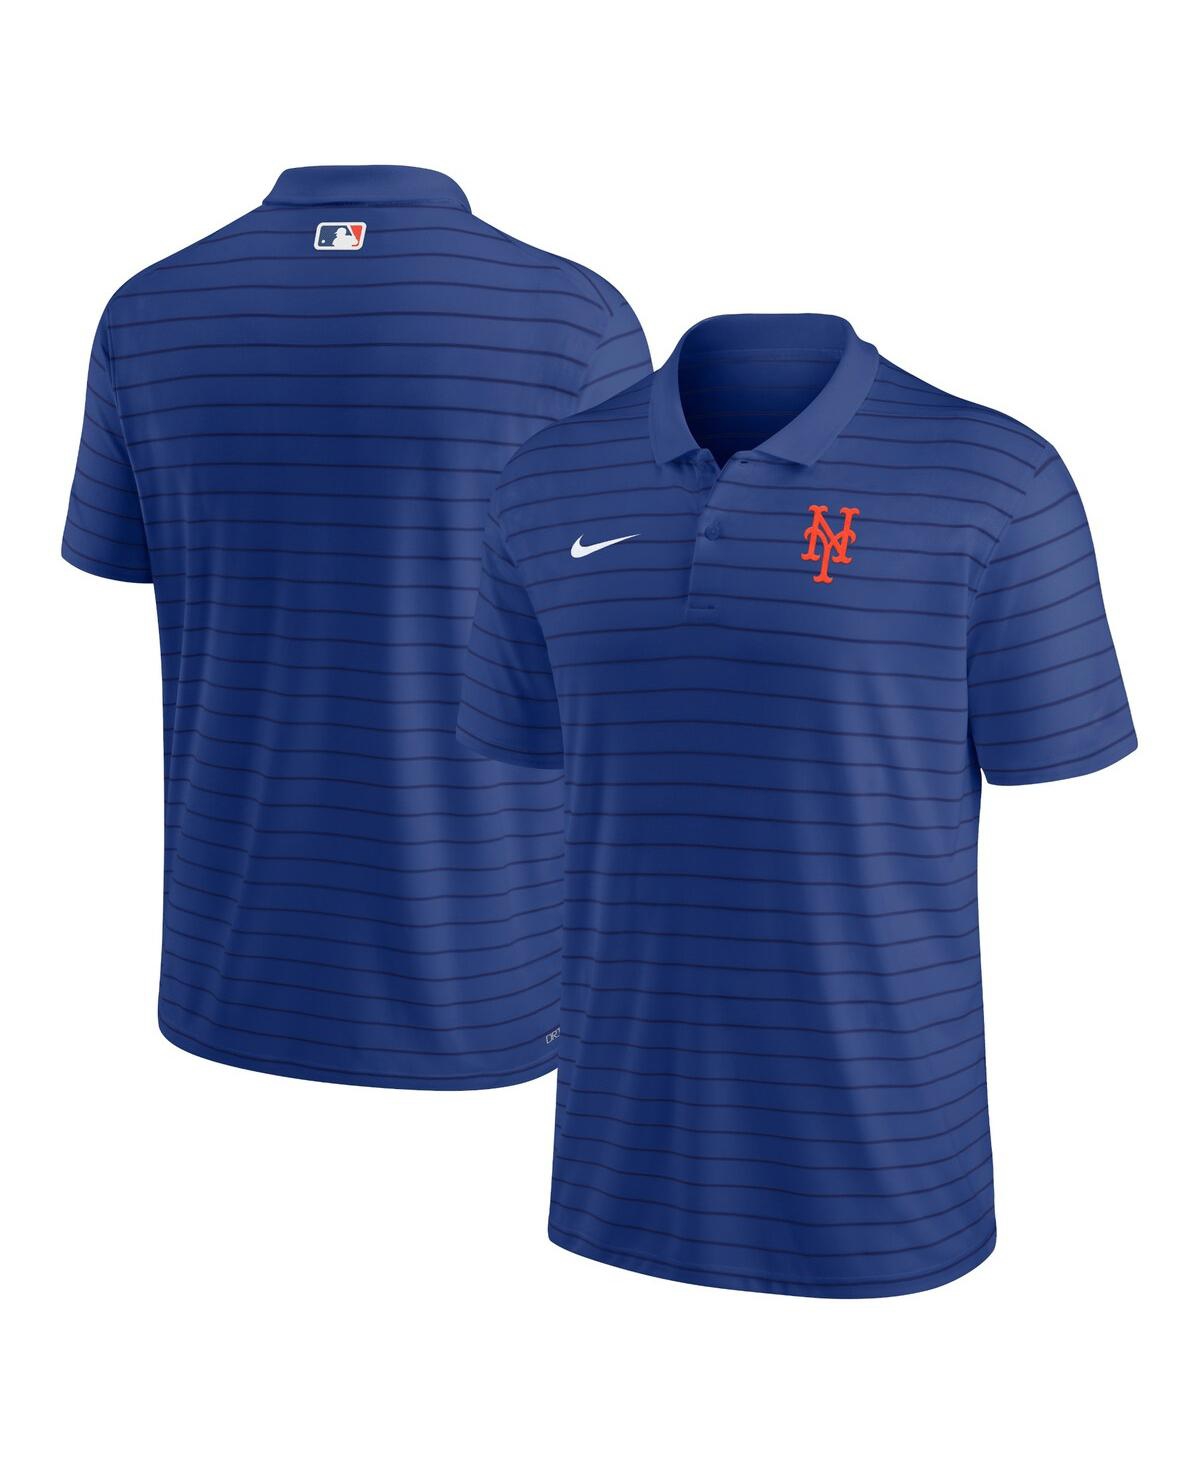 Shop Nike Men's  Royal New York Mets Authentic Collection Victory Striped Performance Polo Shirt